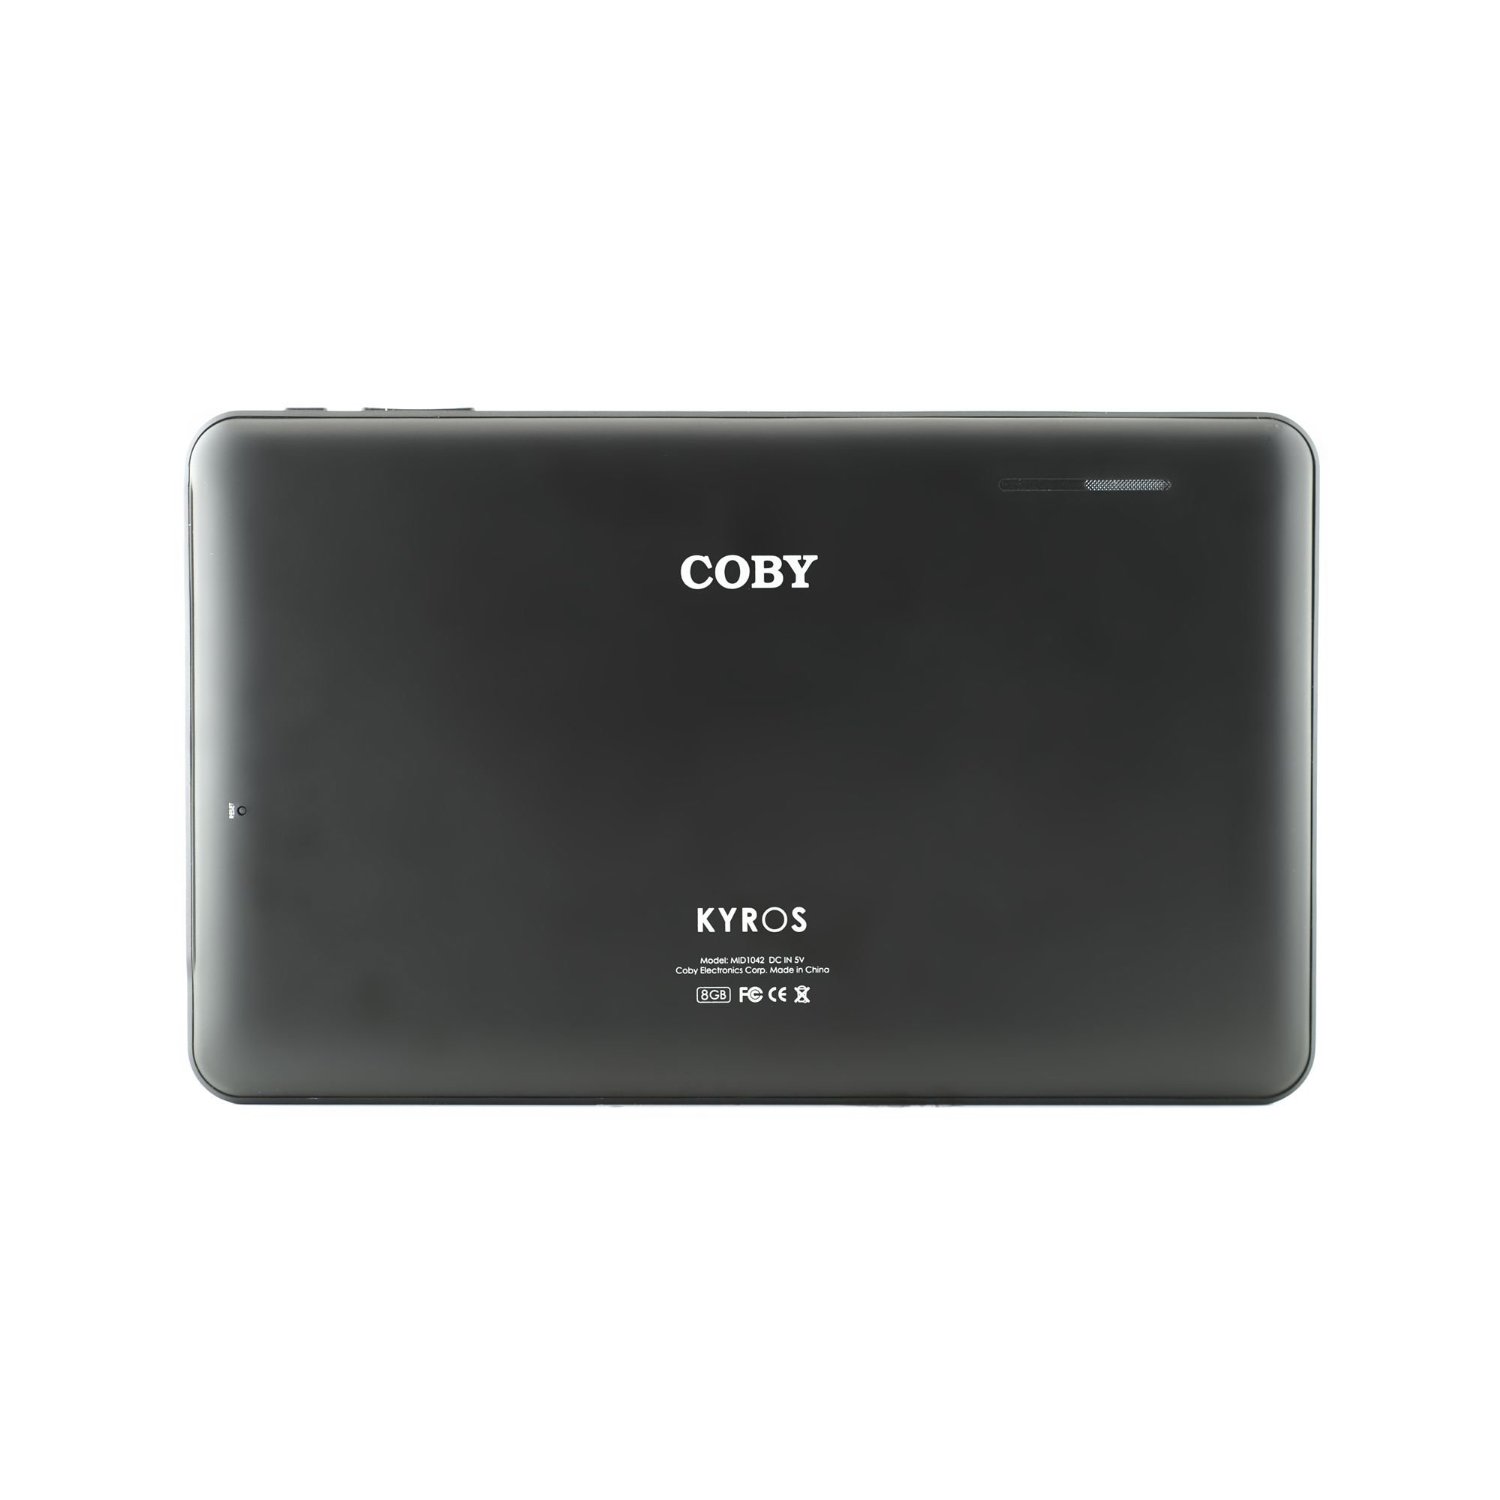 http://thetechjournal.com/wp-content/uploads/images/1206/1339867848-coby-kyros-101inch-android-powered-internet-tablet-10.jpg